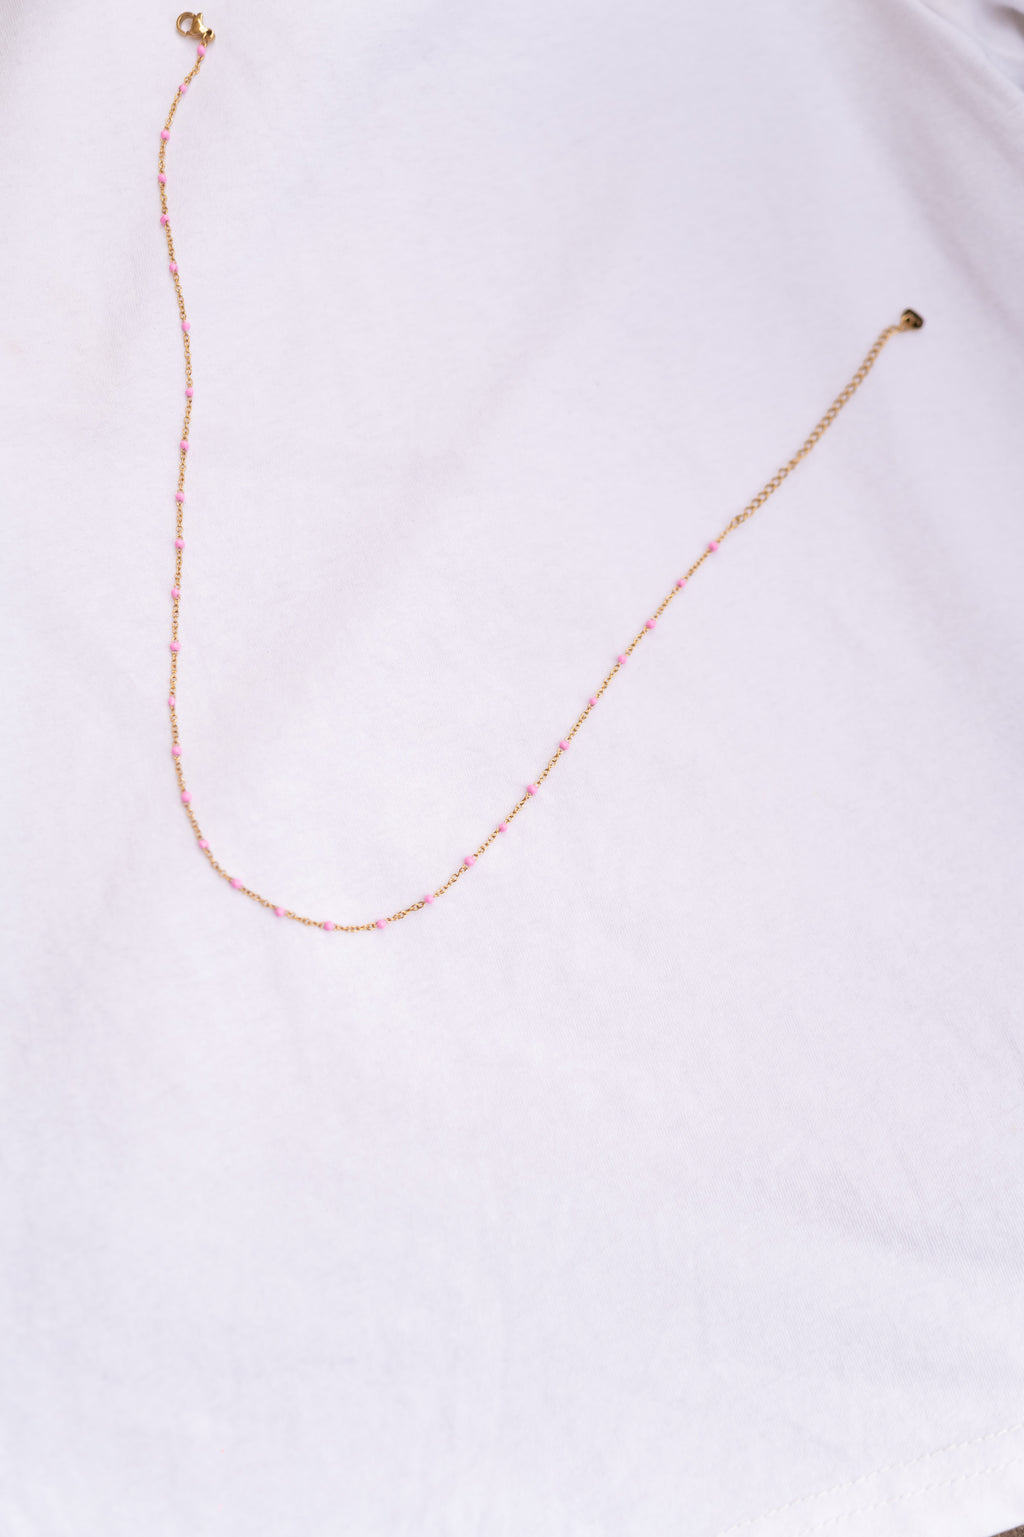 Mary necklace - pink